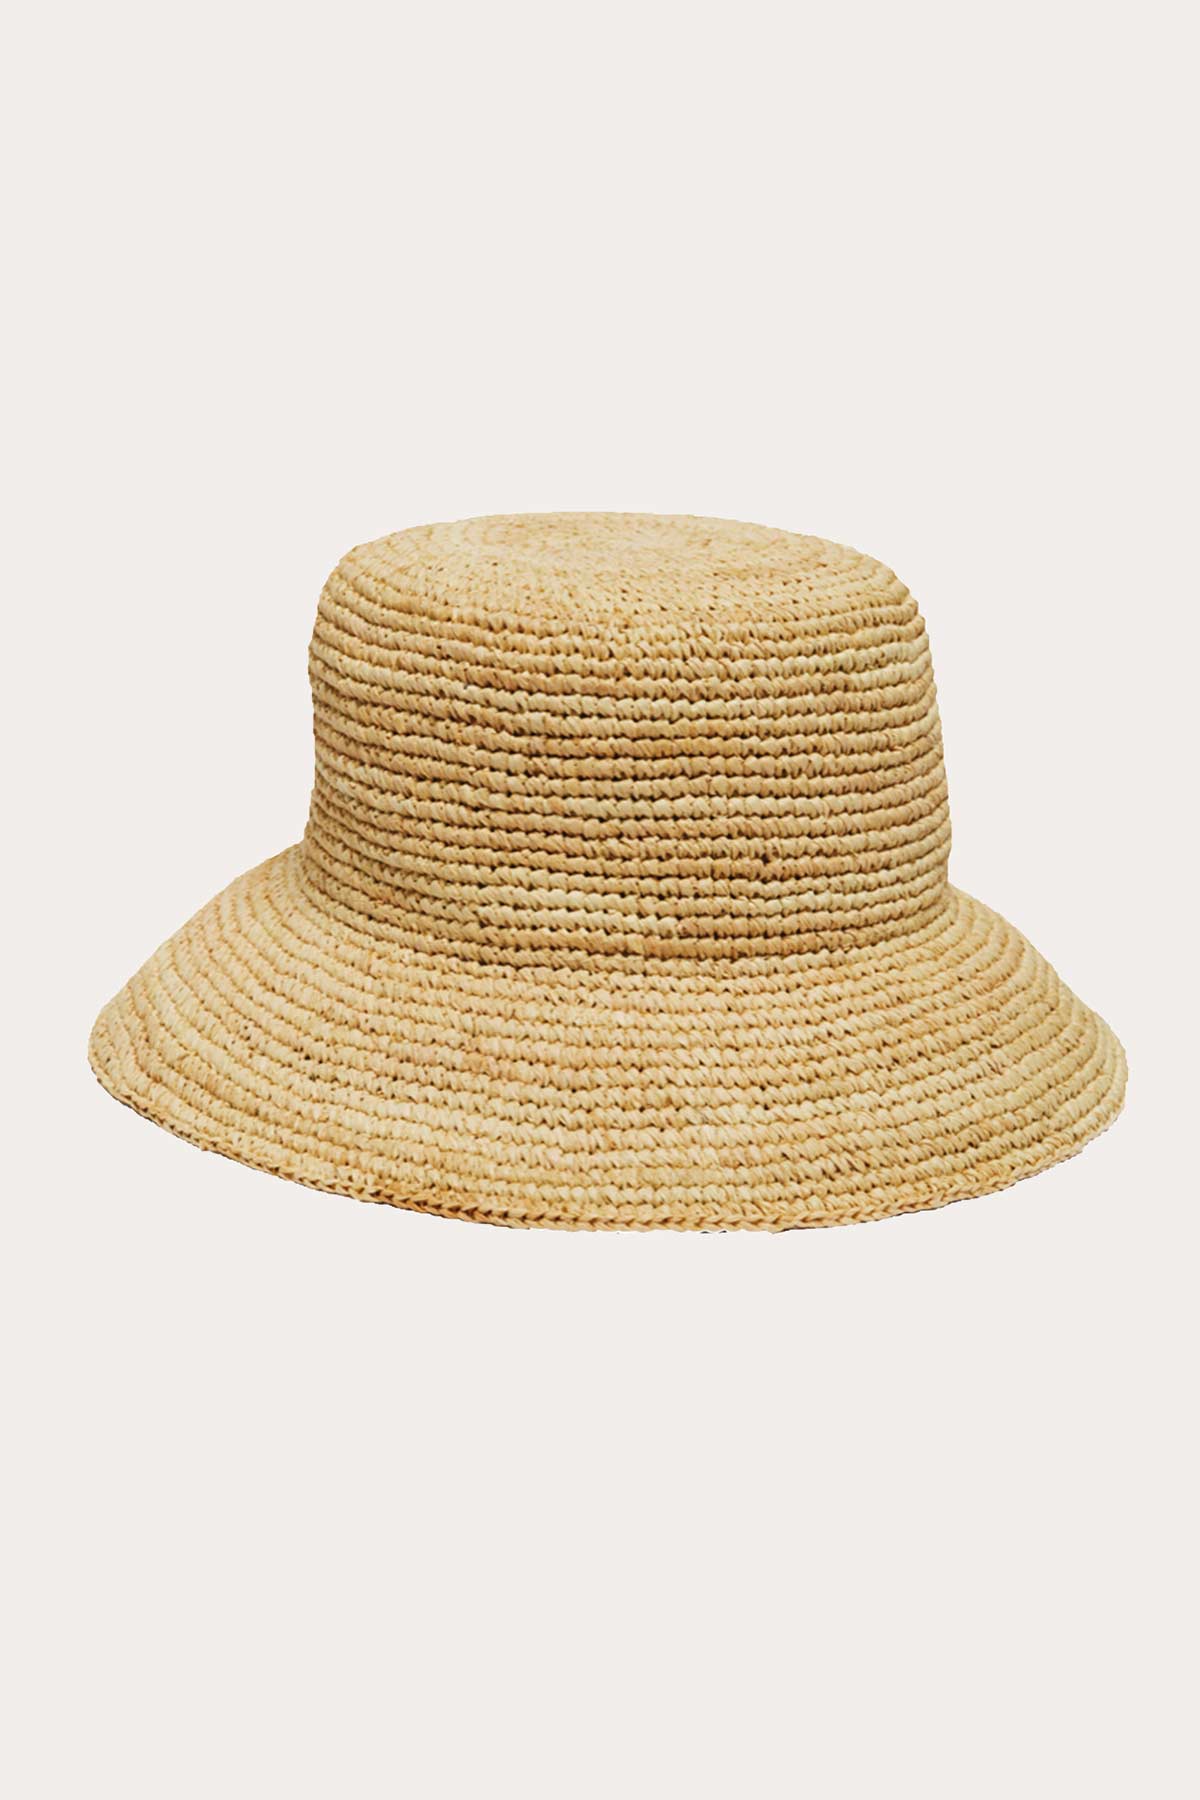 Vitamin A Cannes Straw Bucket Hat Natural Recycled Straw